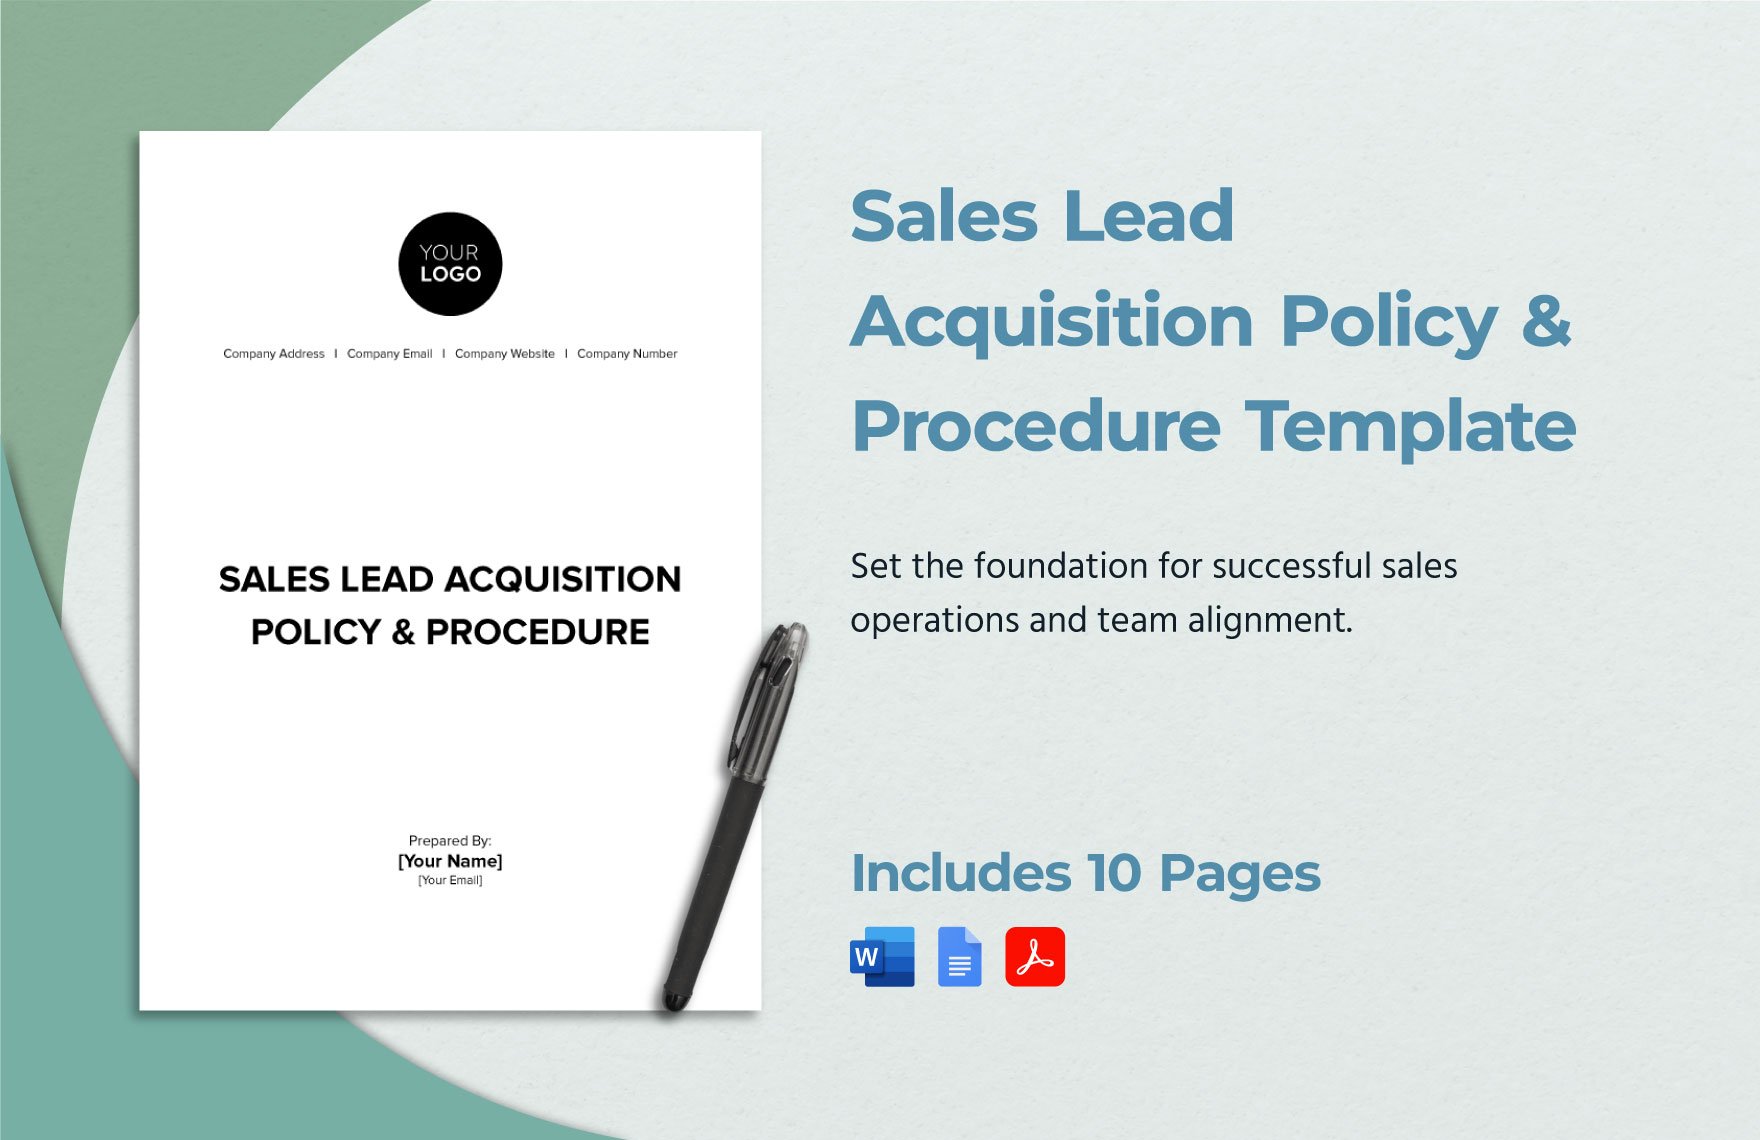 Sales Lead Acquisition Policy & Procedure Template